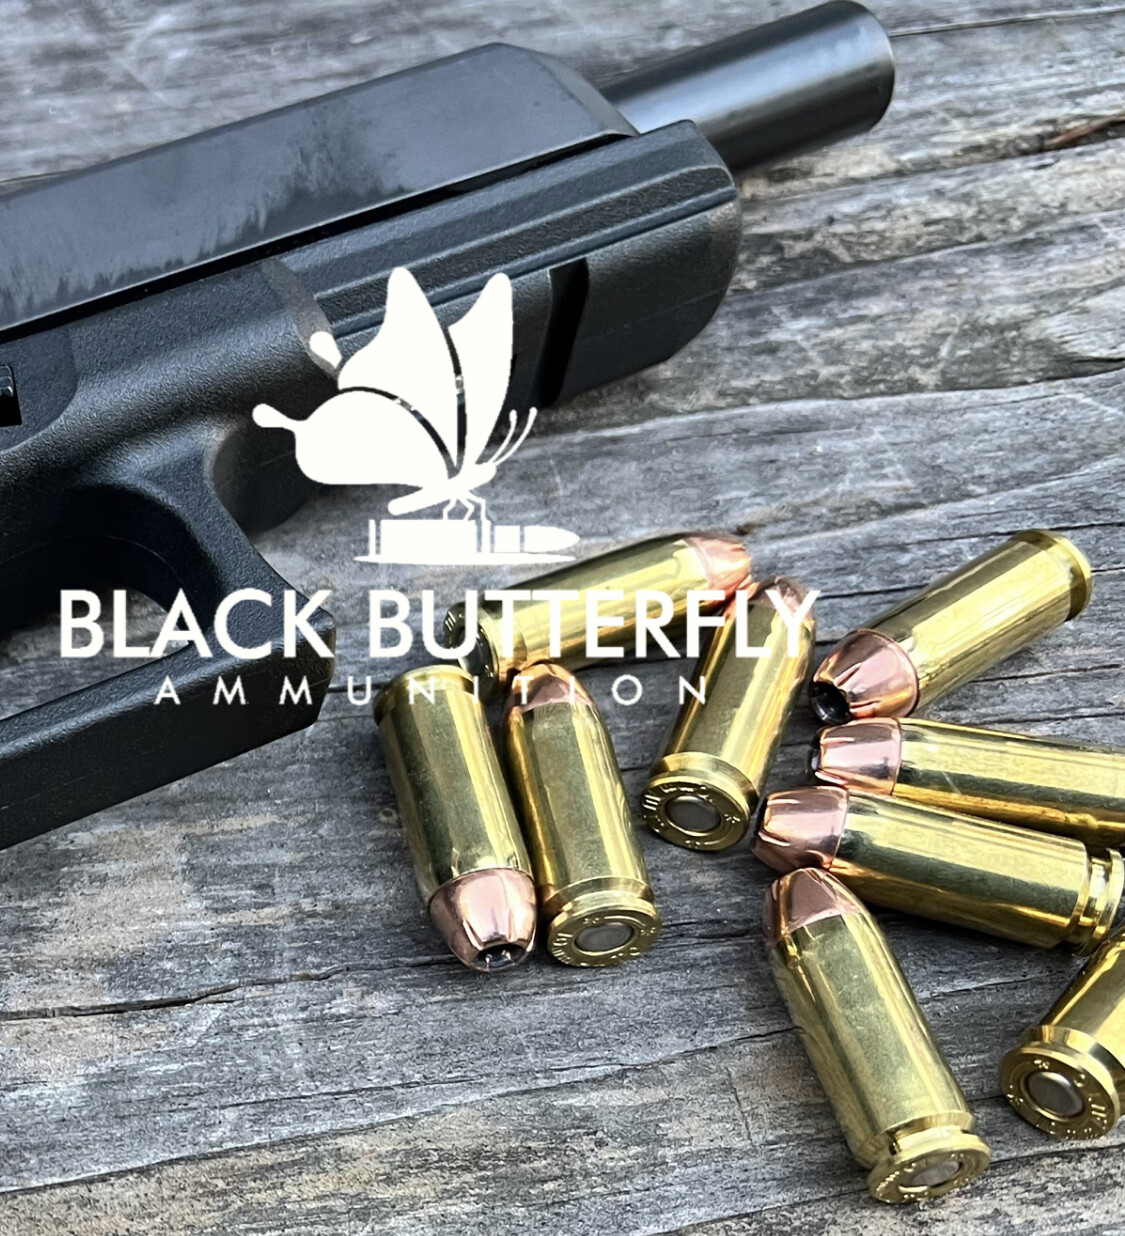 Black Butterfly Ammunition, Premium Self Defense and Hunting Ammo, 10mm Auto, 200 gr, 100 Rounds, Hornady XTPHP, (1150 FPS AMV), MAG DUMP BOX